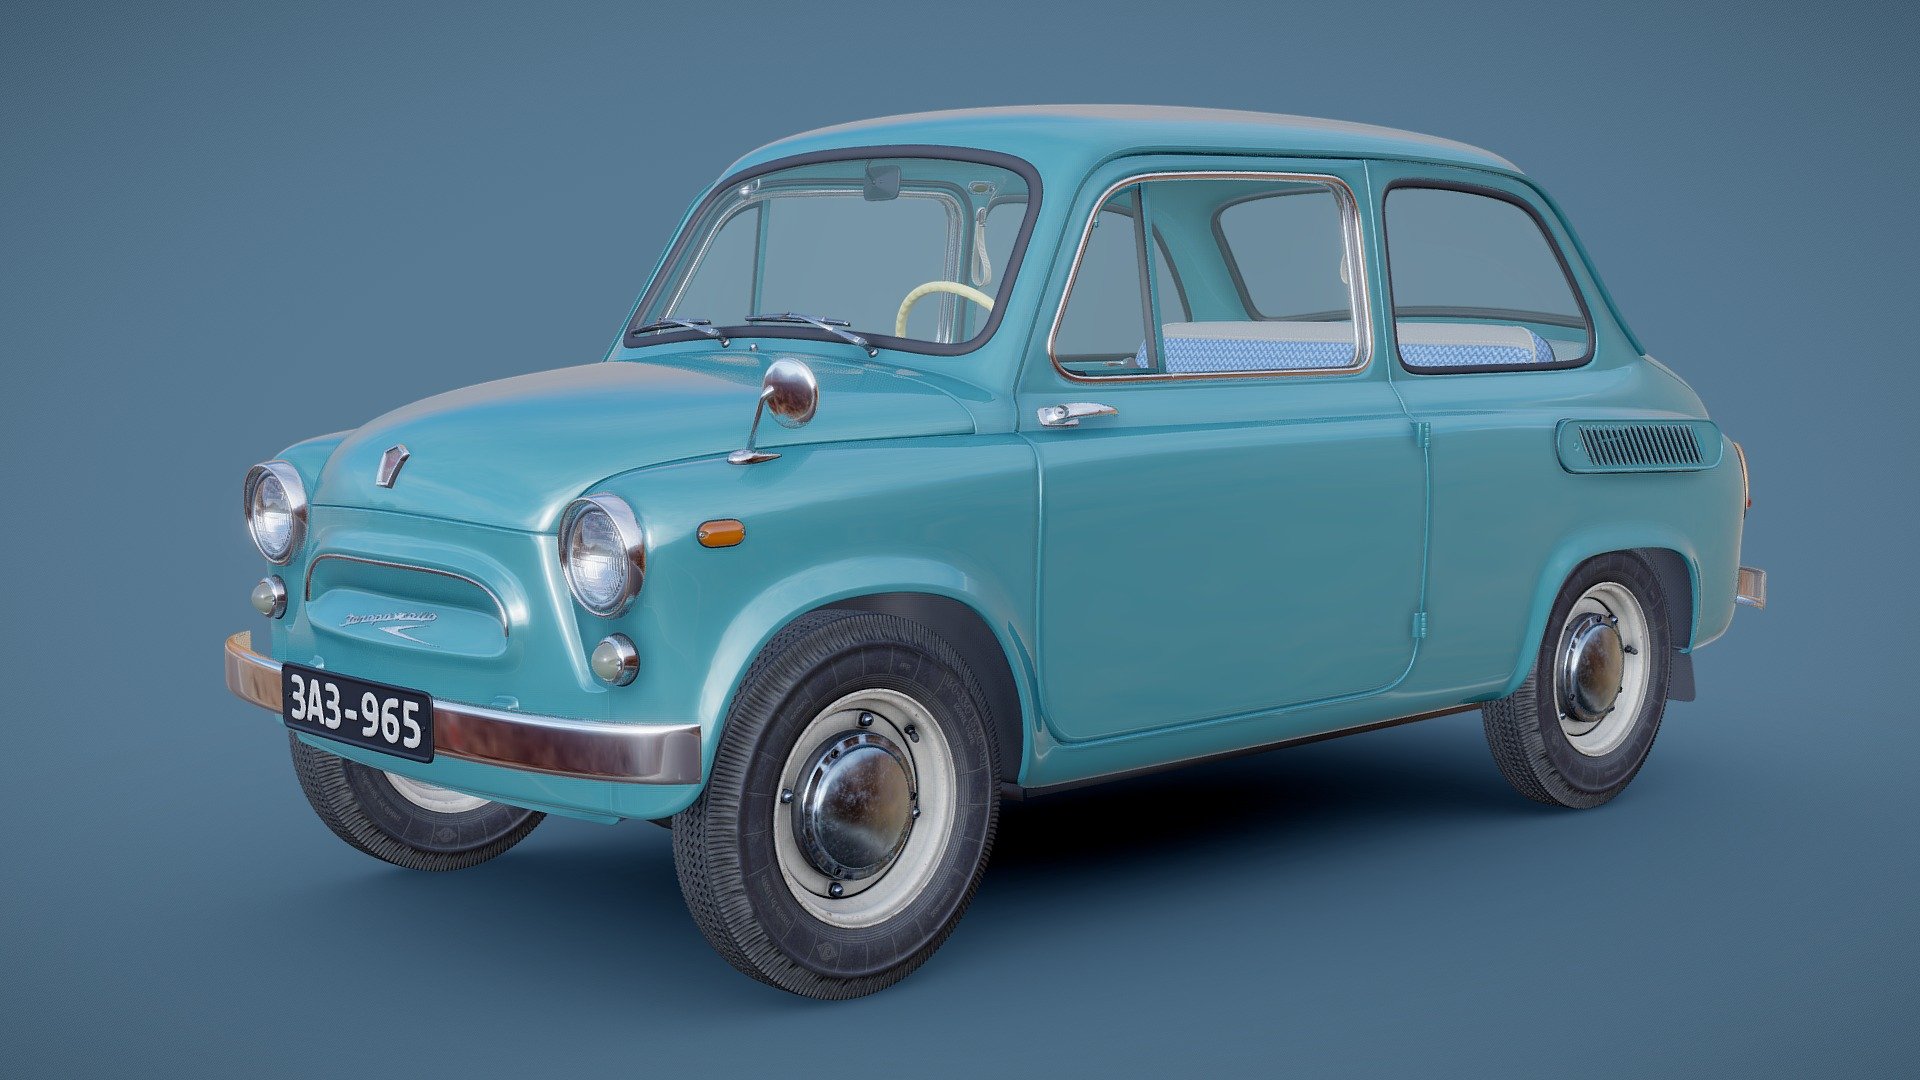 Next iteration of my work in progress of the Zaporozhets 965 model. I had to crunch polygons quite a lot this time, since the model in its original state would not fit through Sketchfab's free tier limit. This cause some issues with shading and texture stretching, but since it's a WIP model, i'm not worrying about that much 3d model